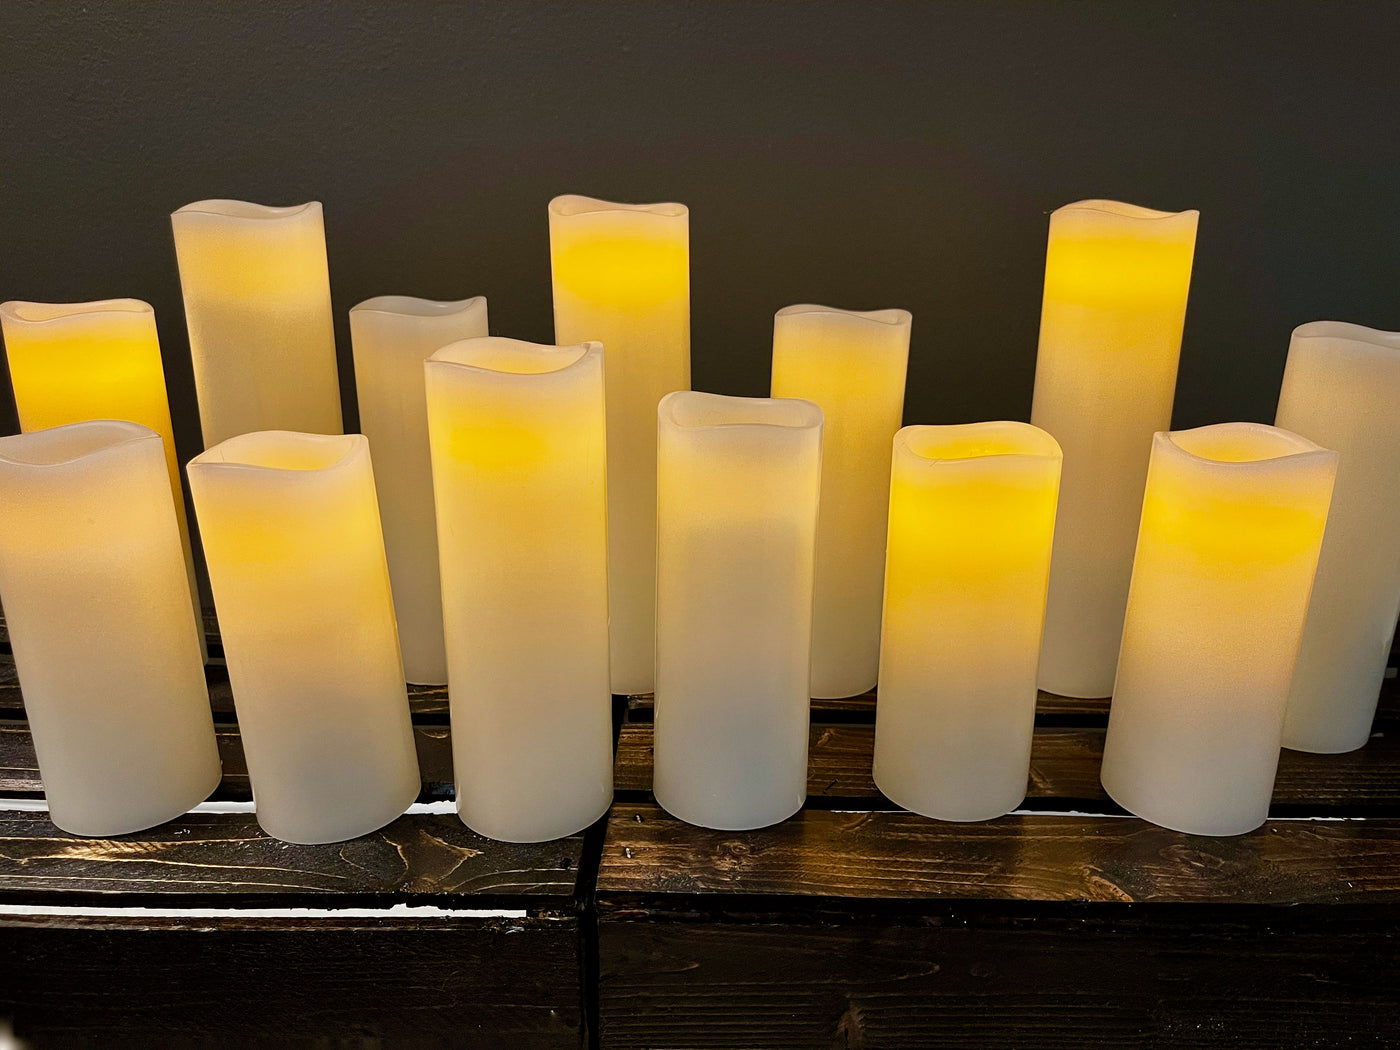 13 LED candles in three sizes (8", 6 1/4", 5") . This beautiful set of candles can be turned on and off with a push of a single button on the handy remote control. The set can also be programmed with one button touch on to stay lighted for 2, 4, 6, or 8 hours.